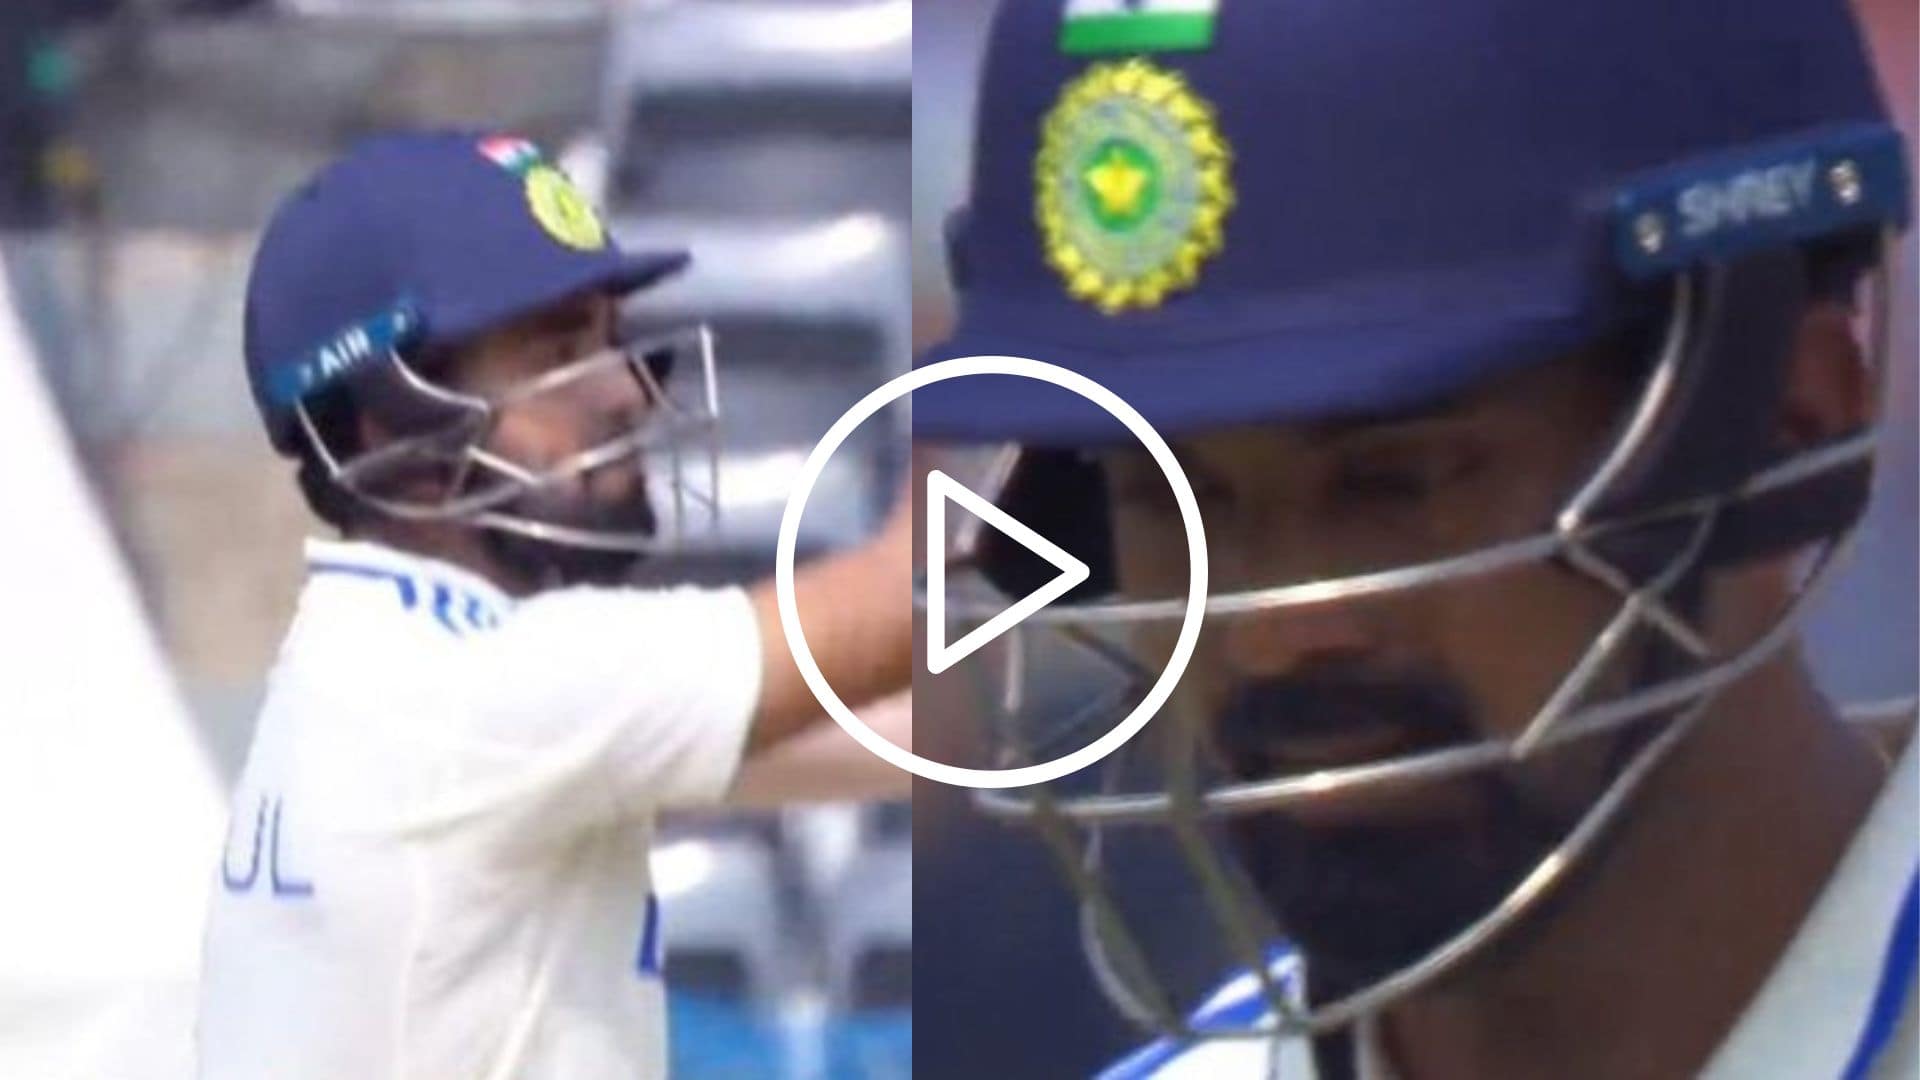 [Watch] KL Rahul Left 'Frustrated' As He Misses A Well-Deserved Century vs ENG